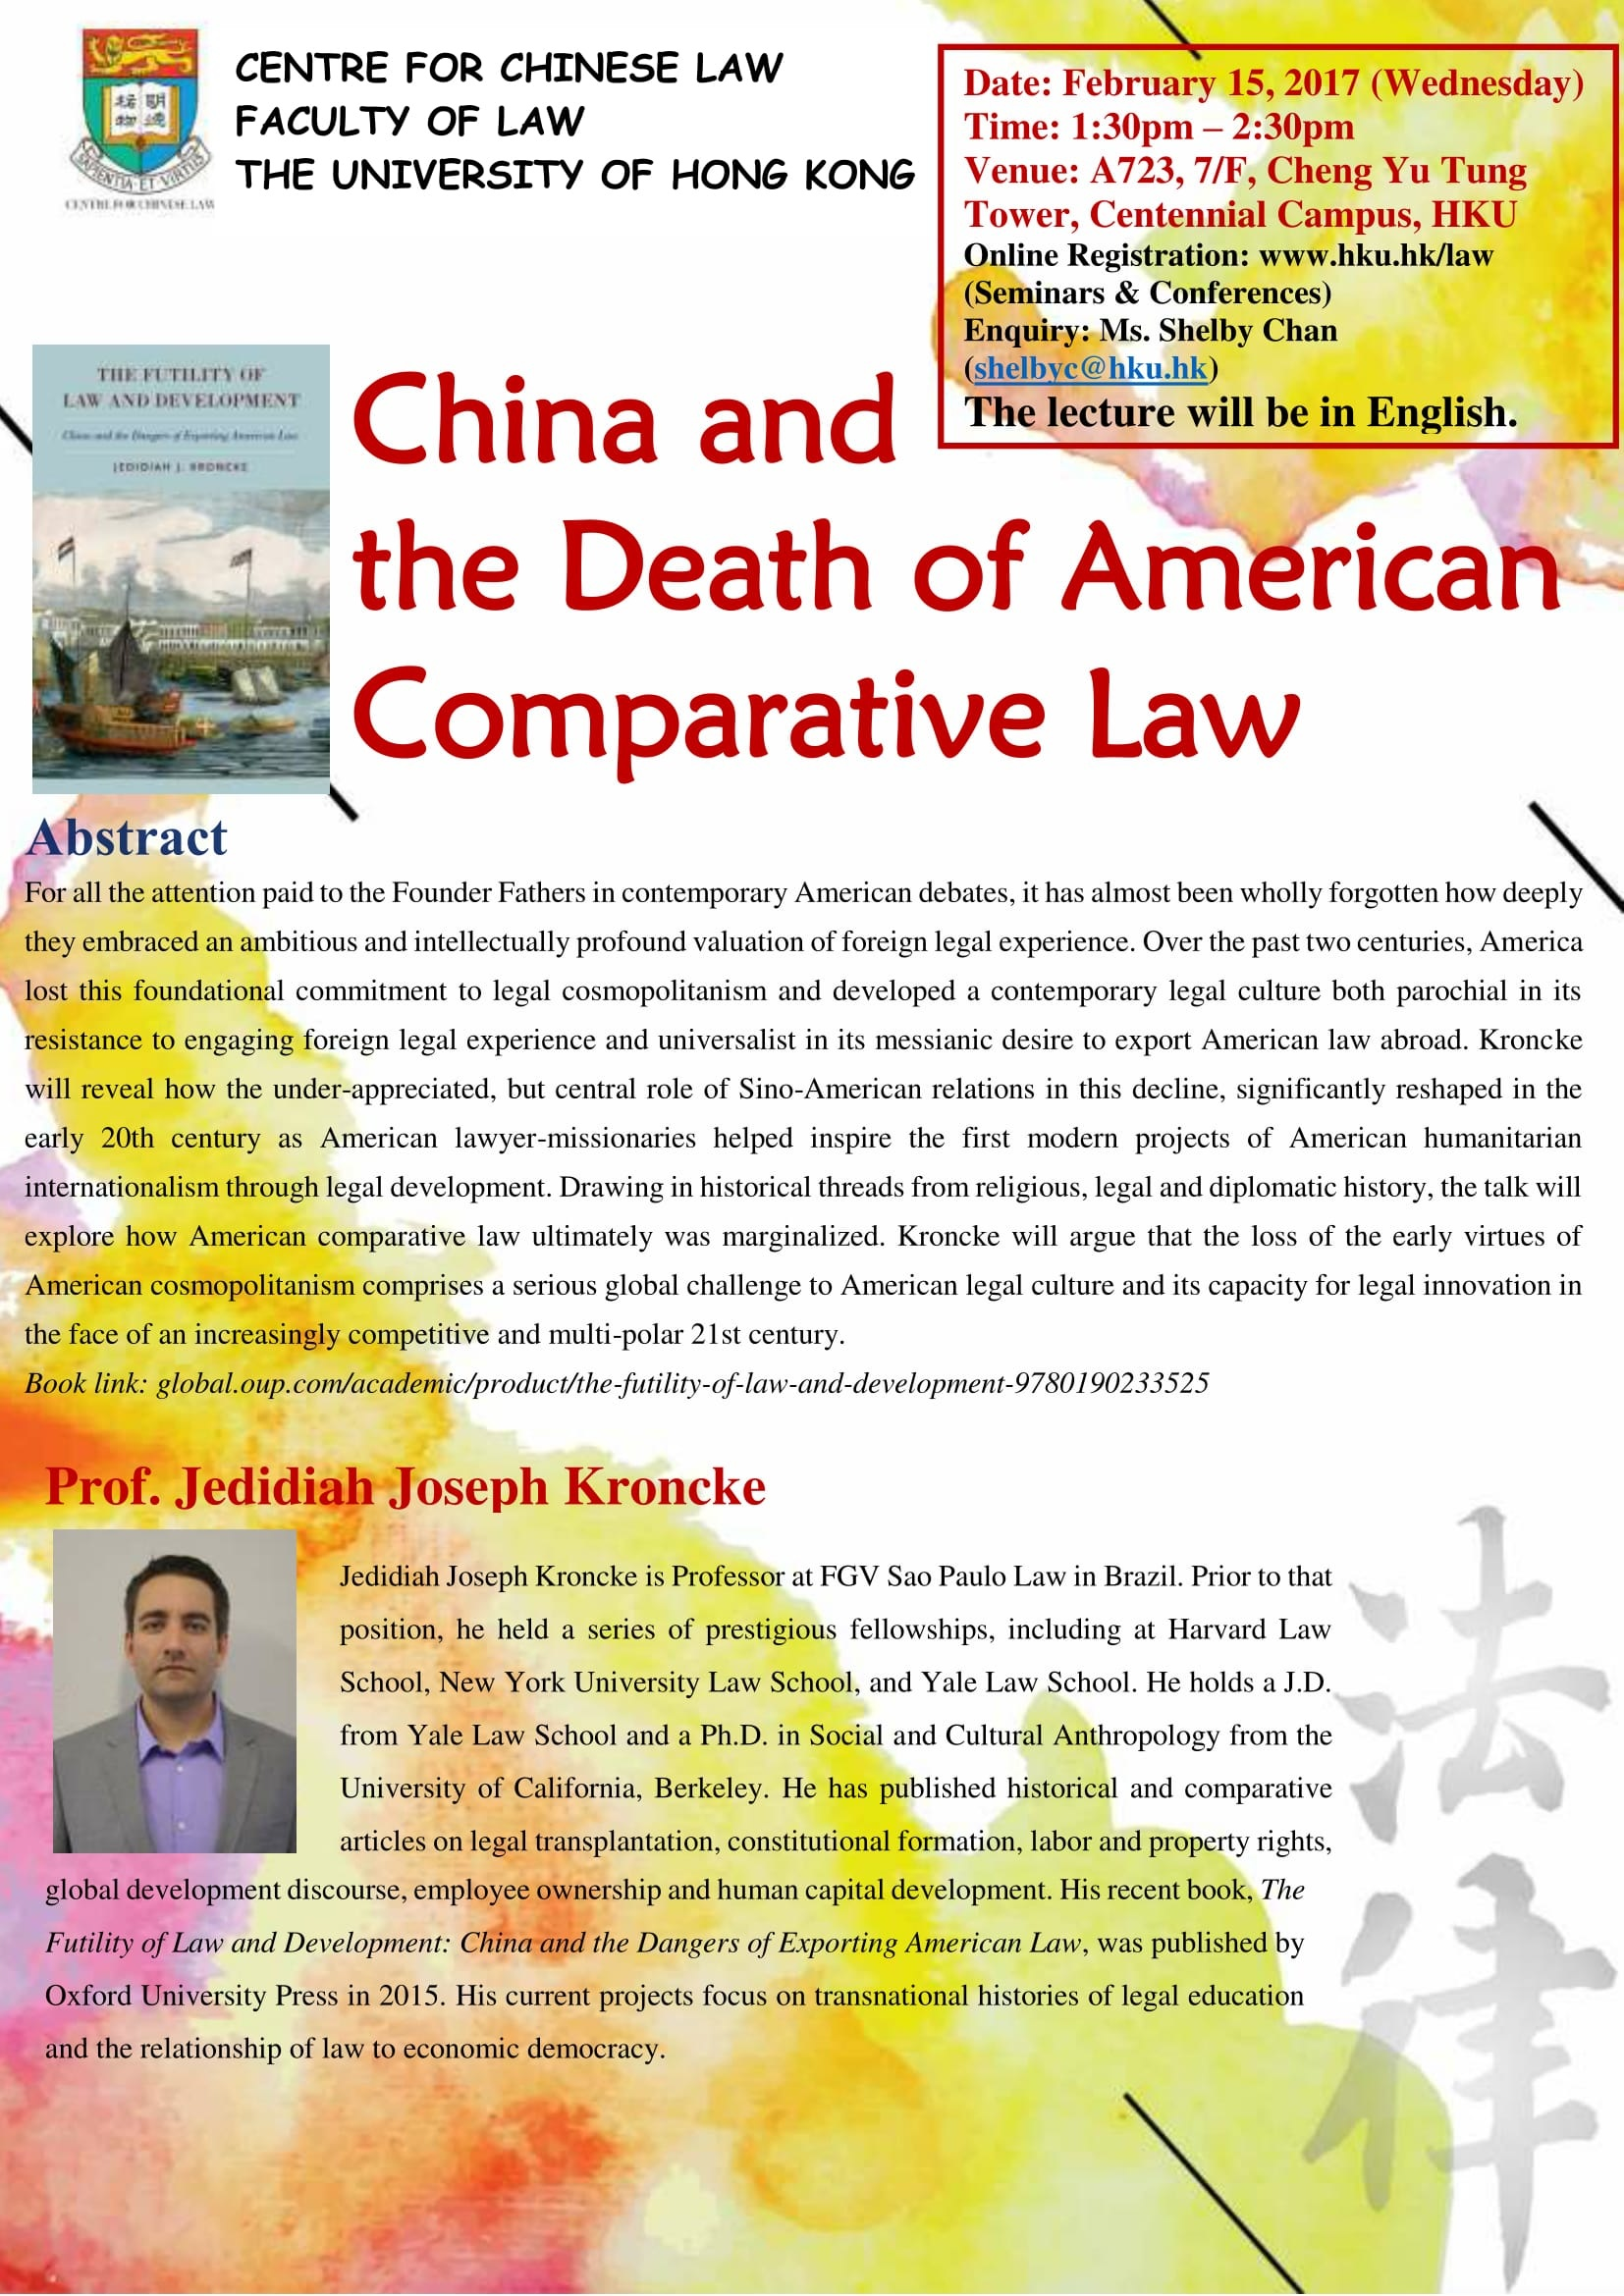 CCL Talk: China and the Death of American Comparative Law